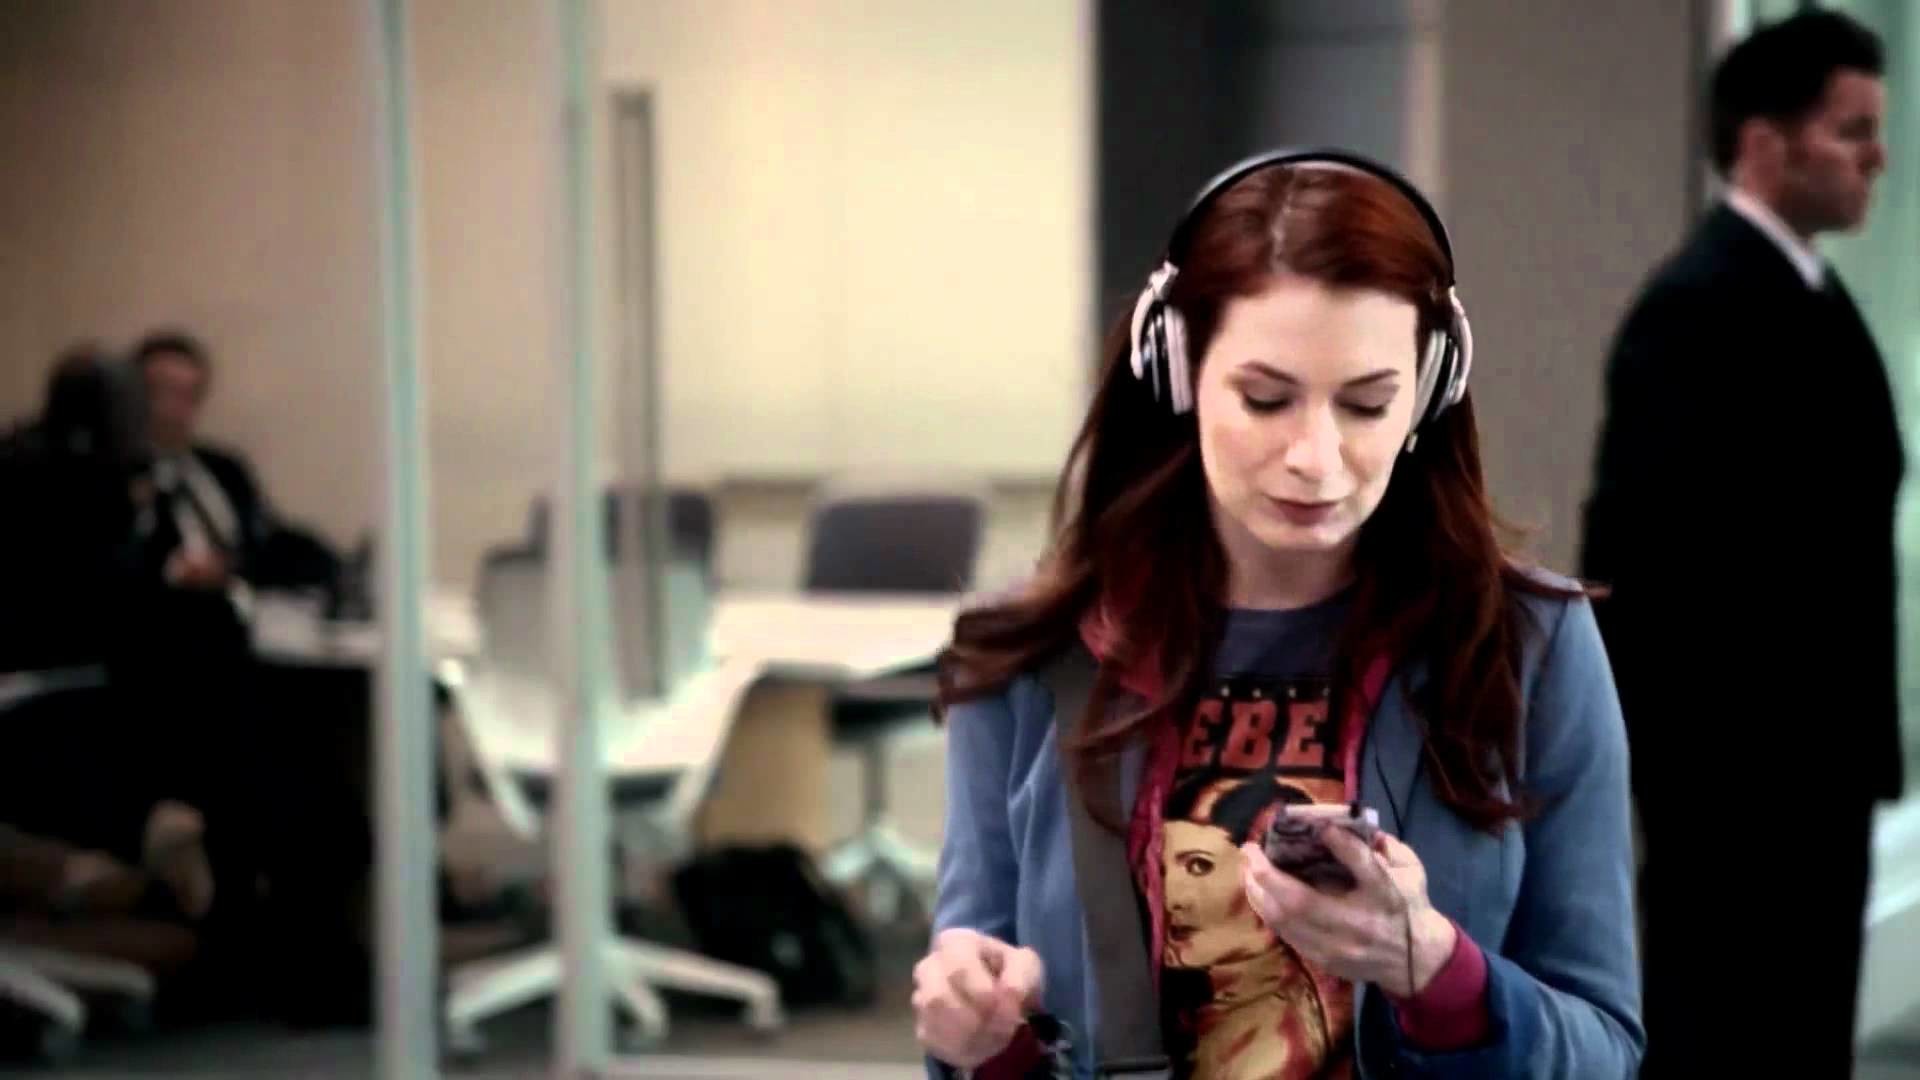 Felicia Day on Supernatural start the day with a crazy little dance